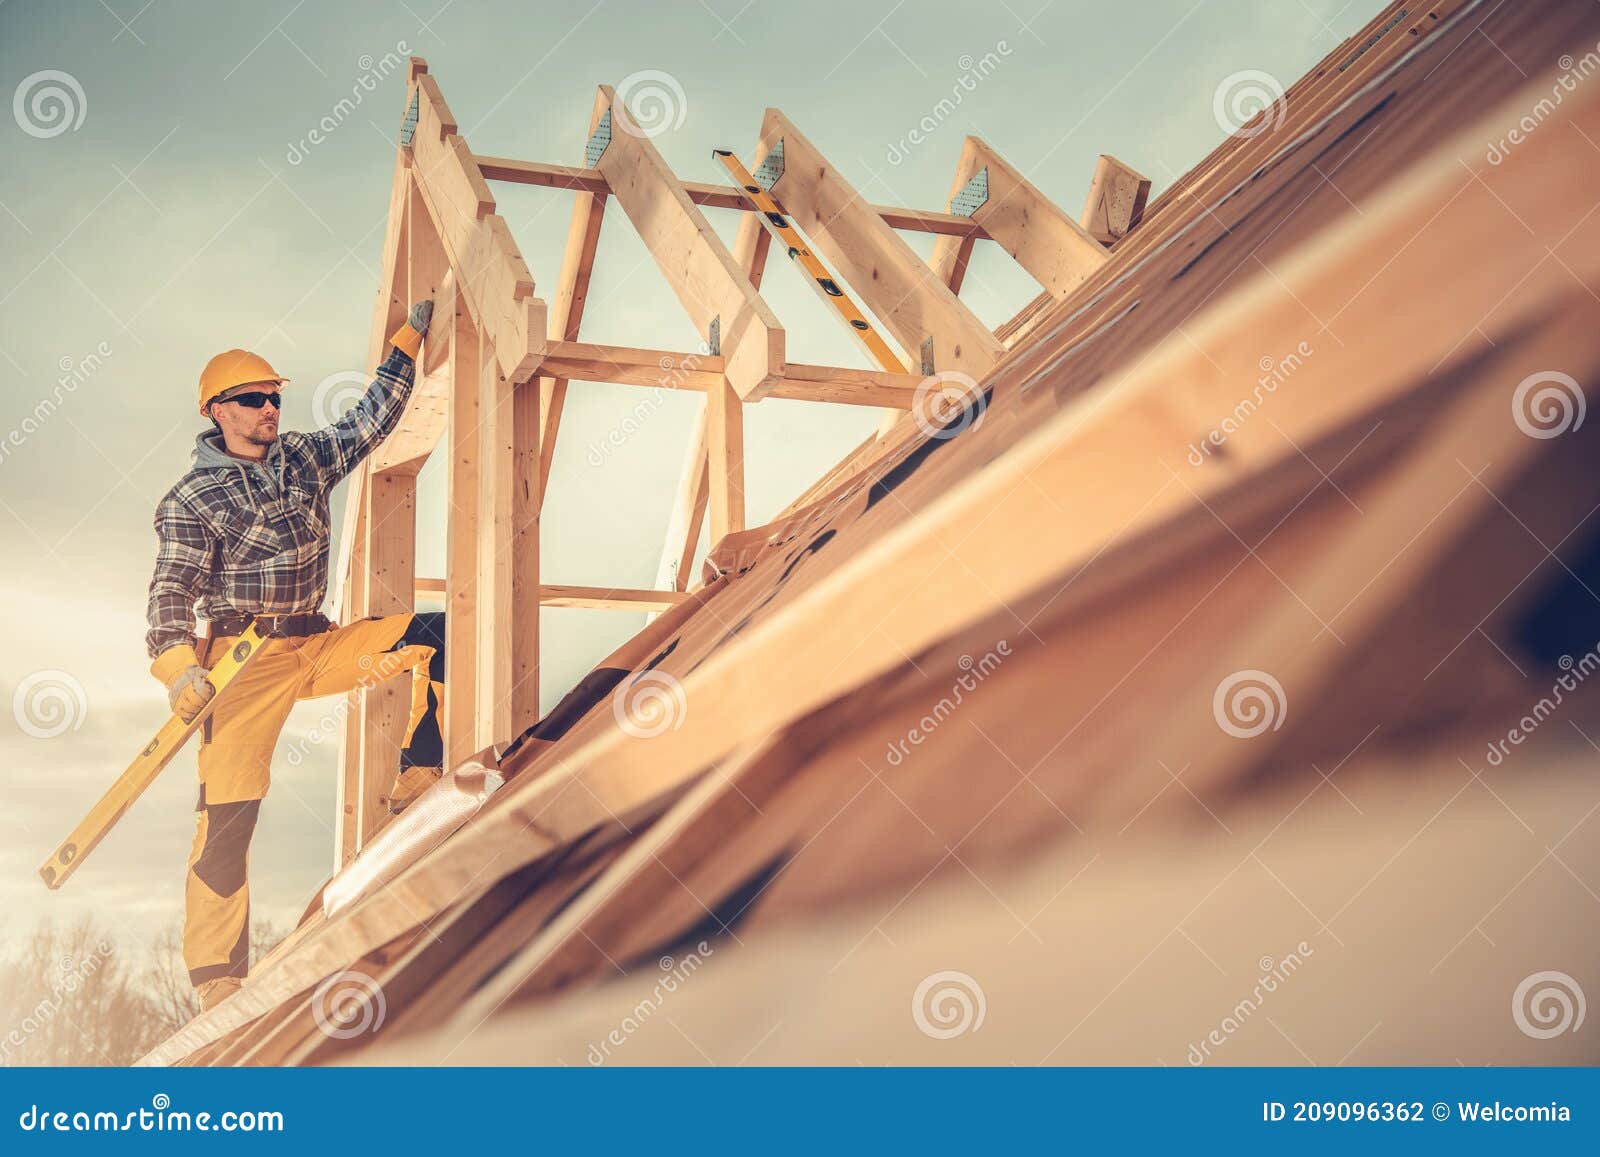 new wooden house construction worker